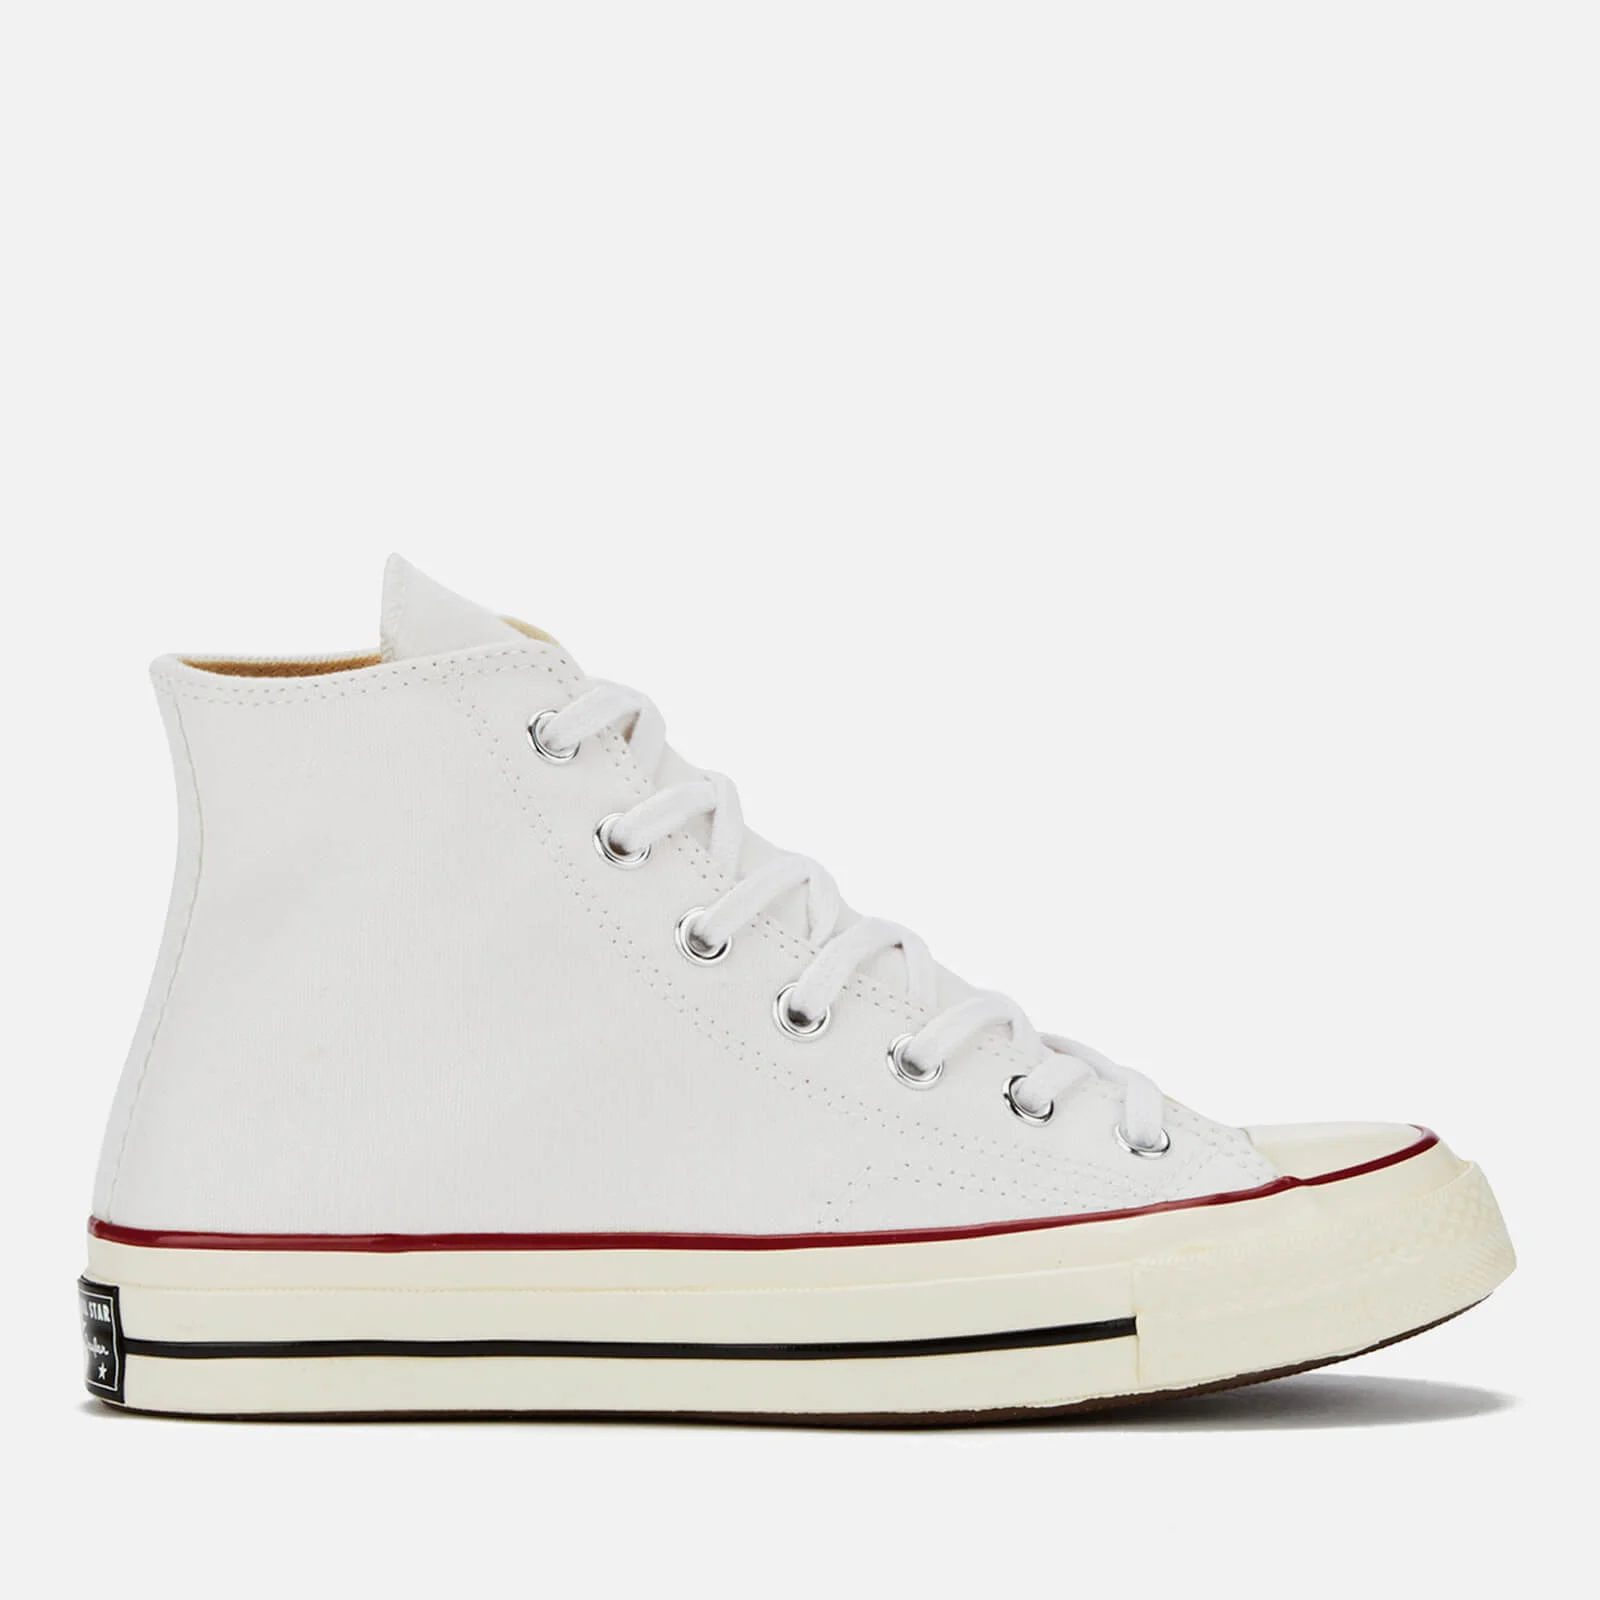 Converse Chuck Taylor All Star '70 Hi-Top Trainers - White/Egret/Black Image 1